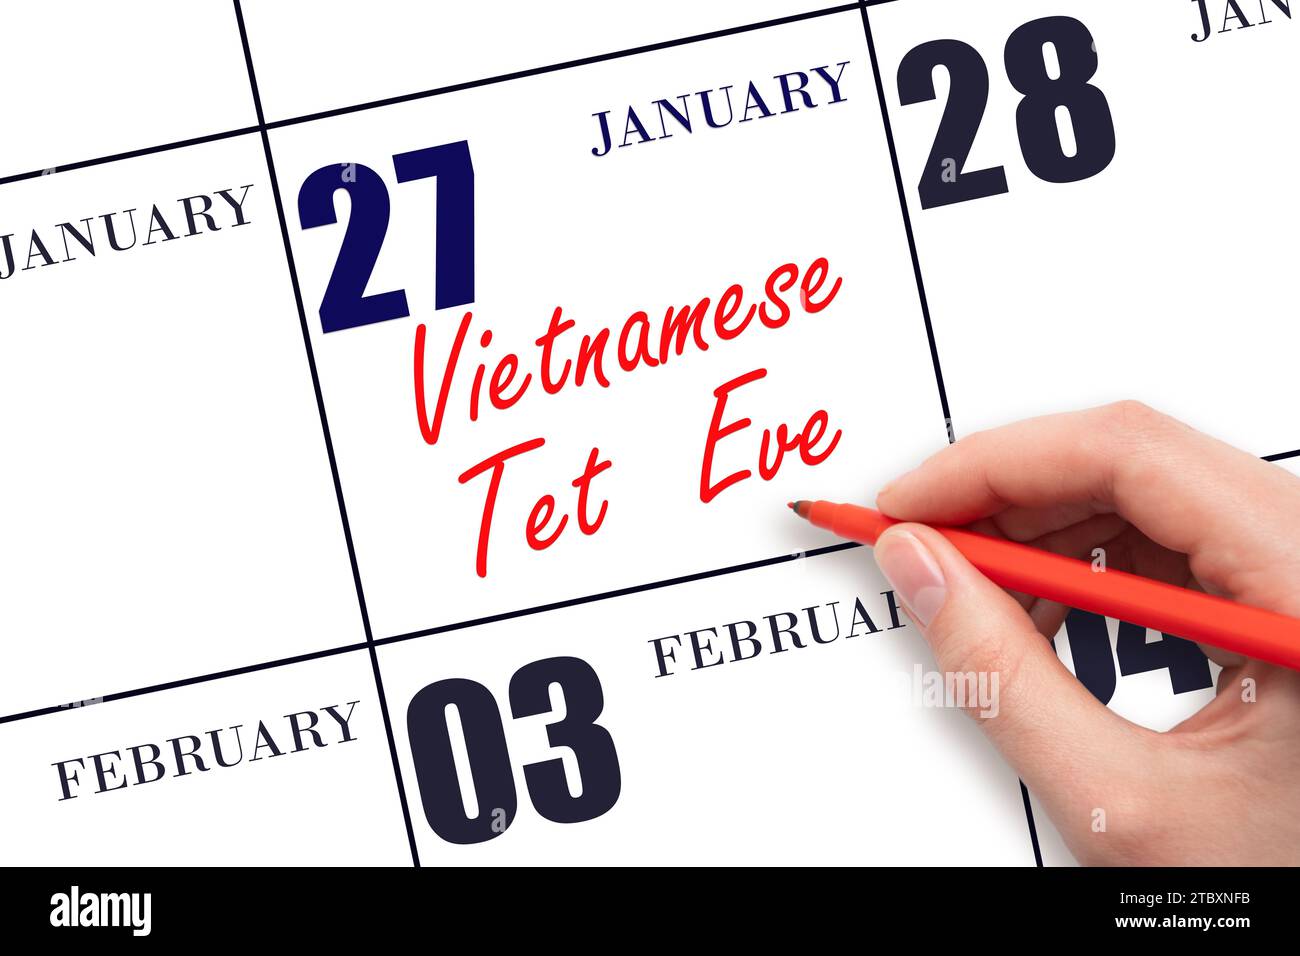 January 27. Hand writing text Vietnamese Tet Eve on calendar date. Save the date. Holiday. Day of the year concept. Stock Photo